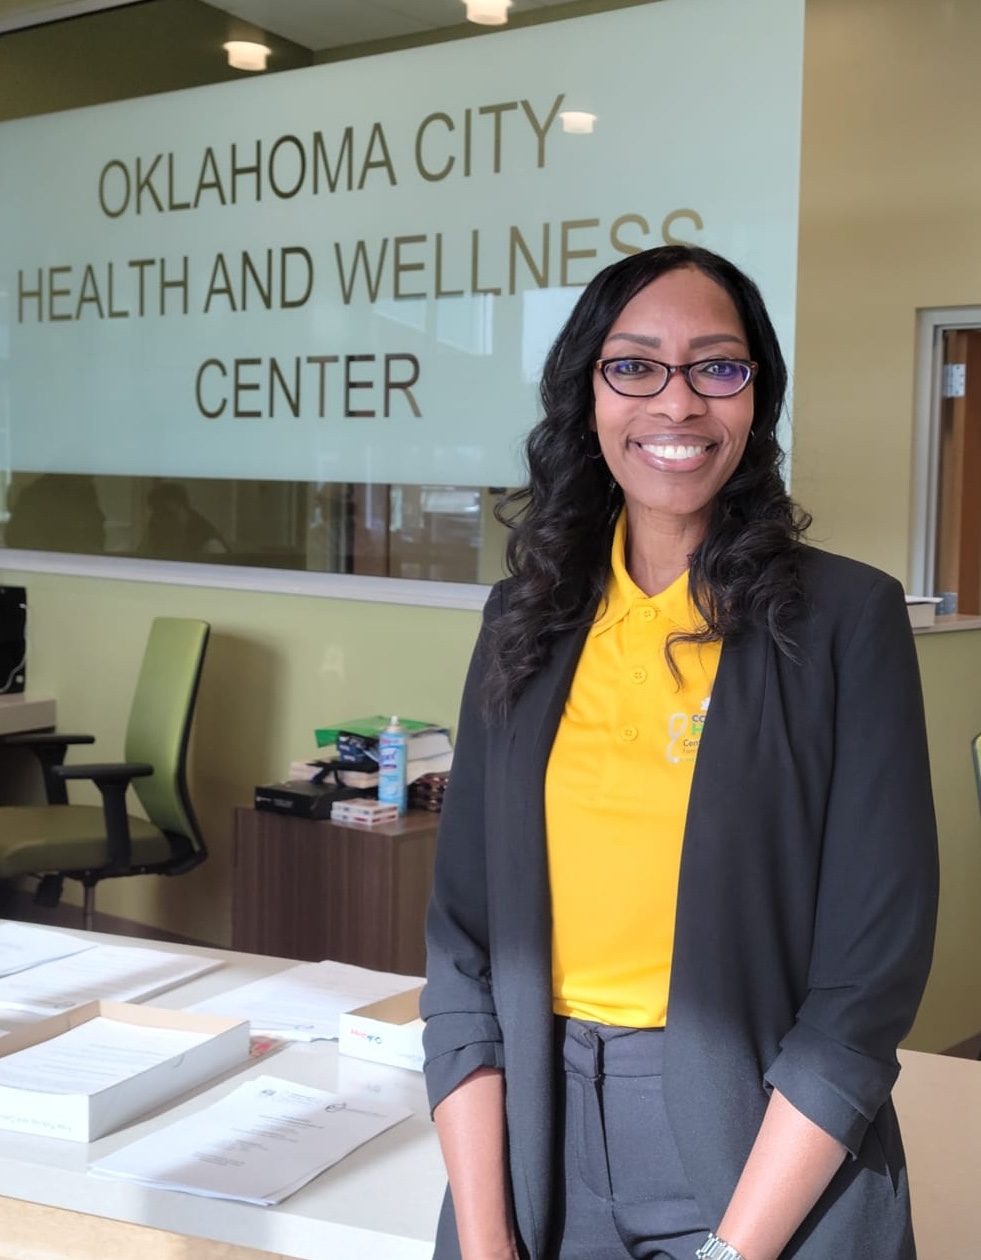 Keisha Williams standing in front of the Oklahoma City Health and Wellness Center